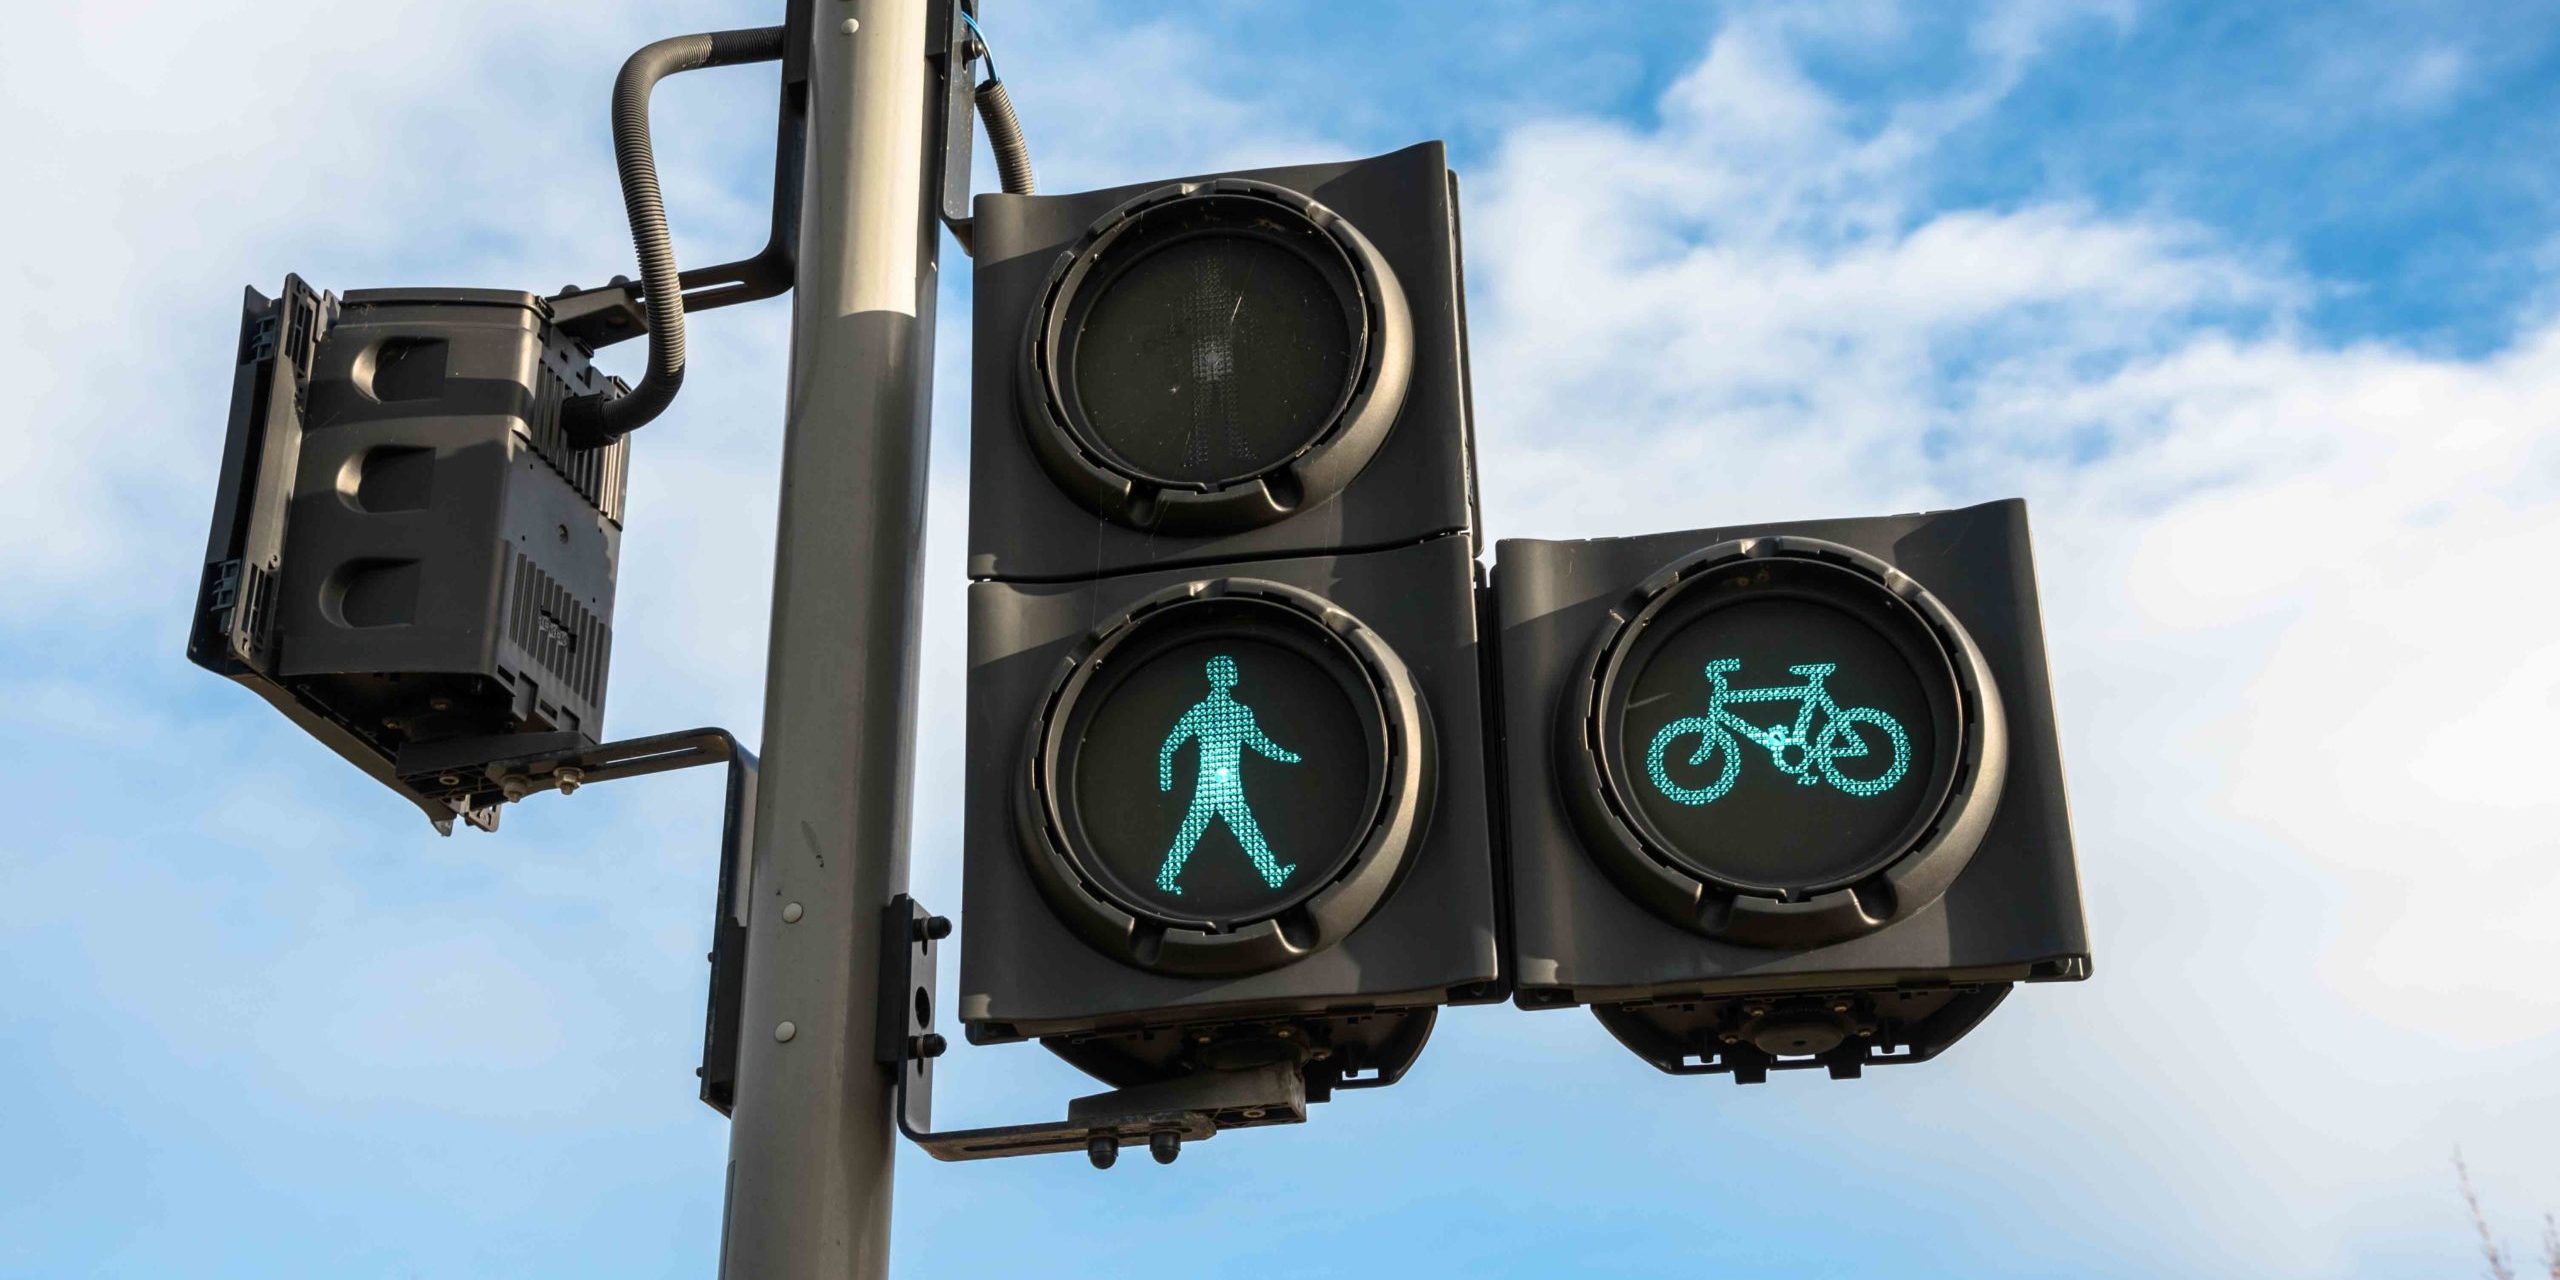 Connecticut DOT Helps Accommodate Walking and Bicycling through Road Audits